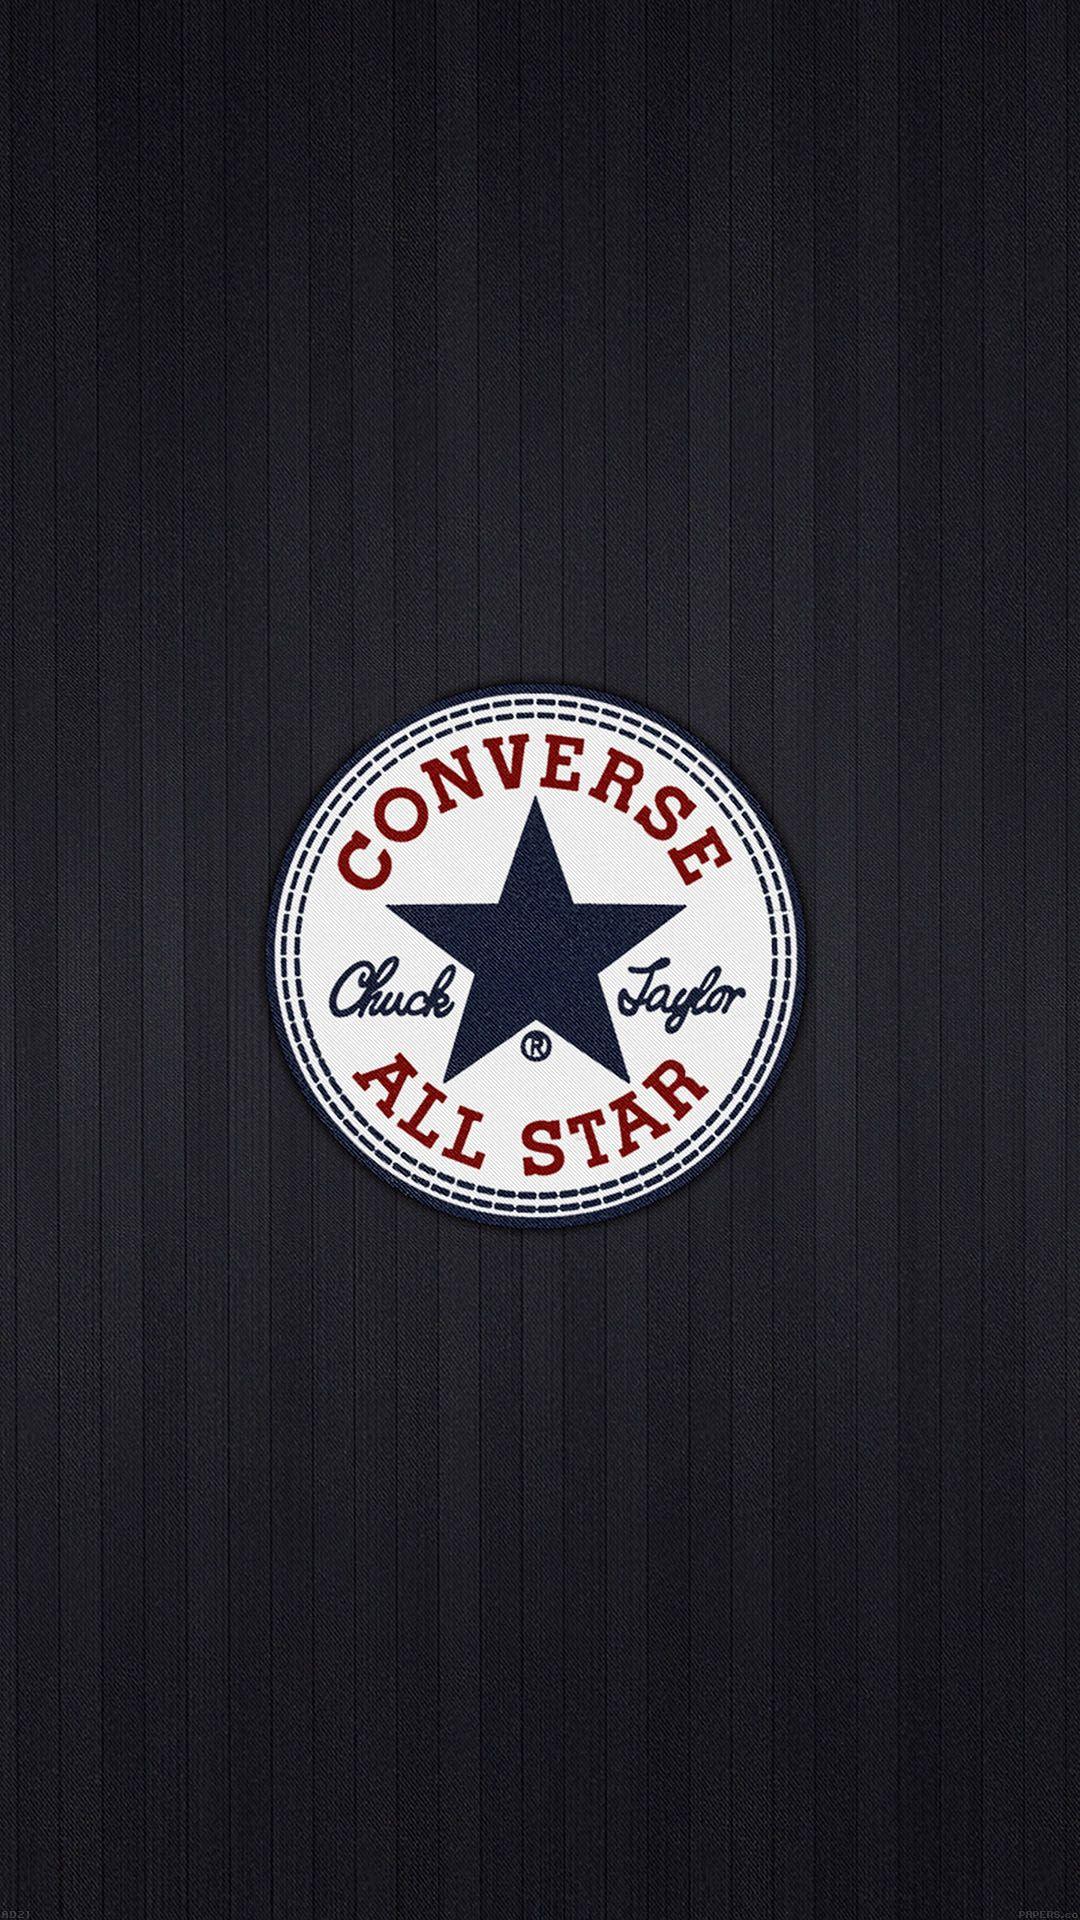 Converse All-Star Logo - iPhone6papers - ad21-converse-allstar-logo